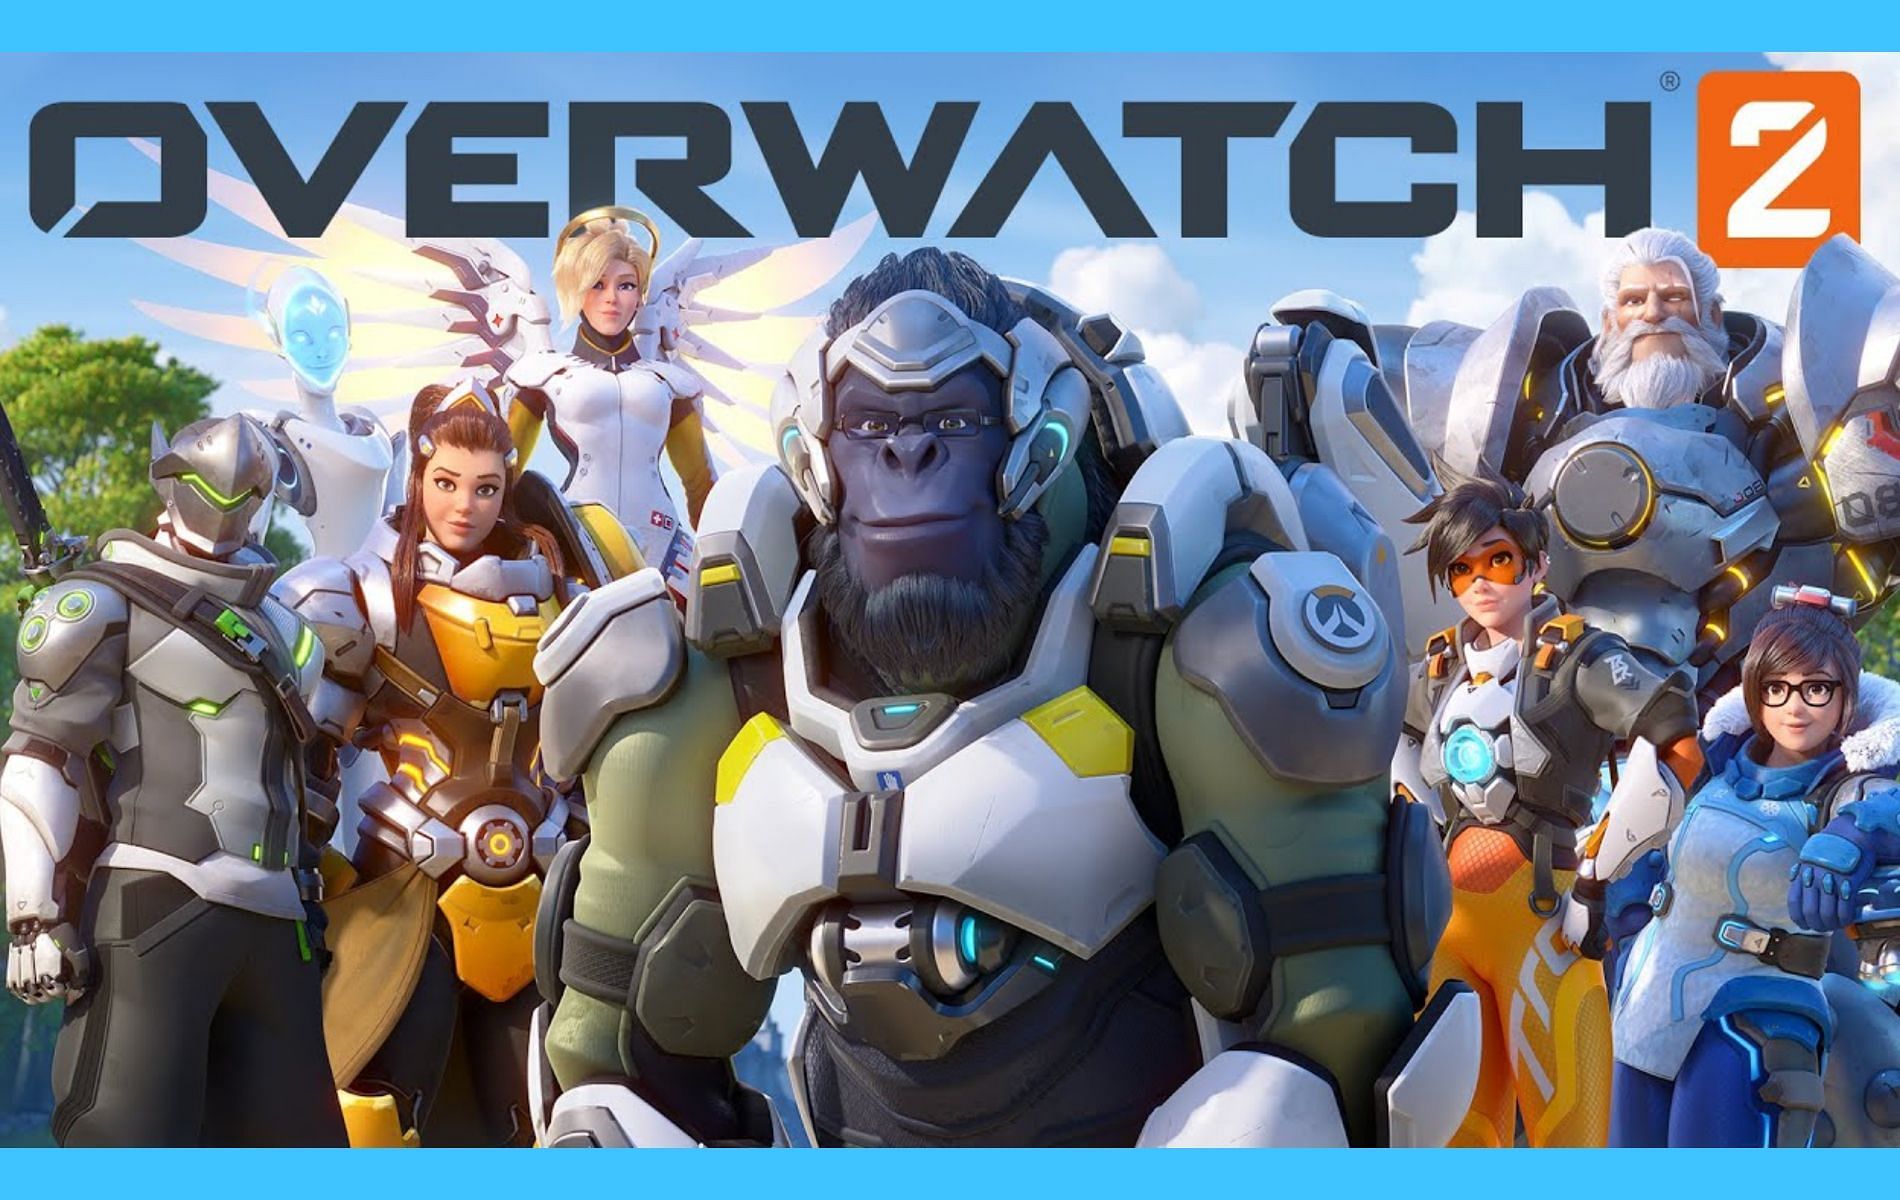 How to fix the &quot;Voice chat not working&quot; error in Overwatch 2? (Image via Blizzard)